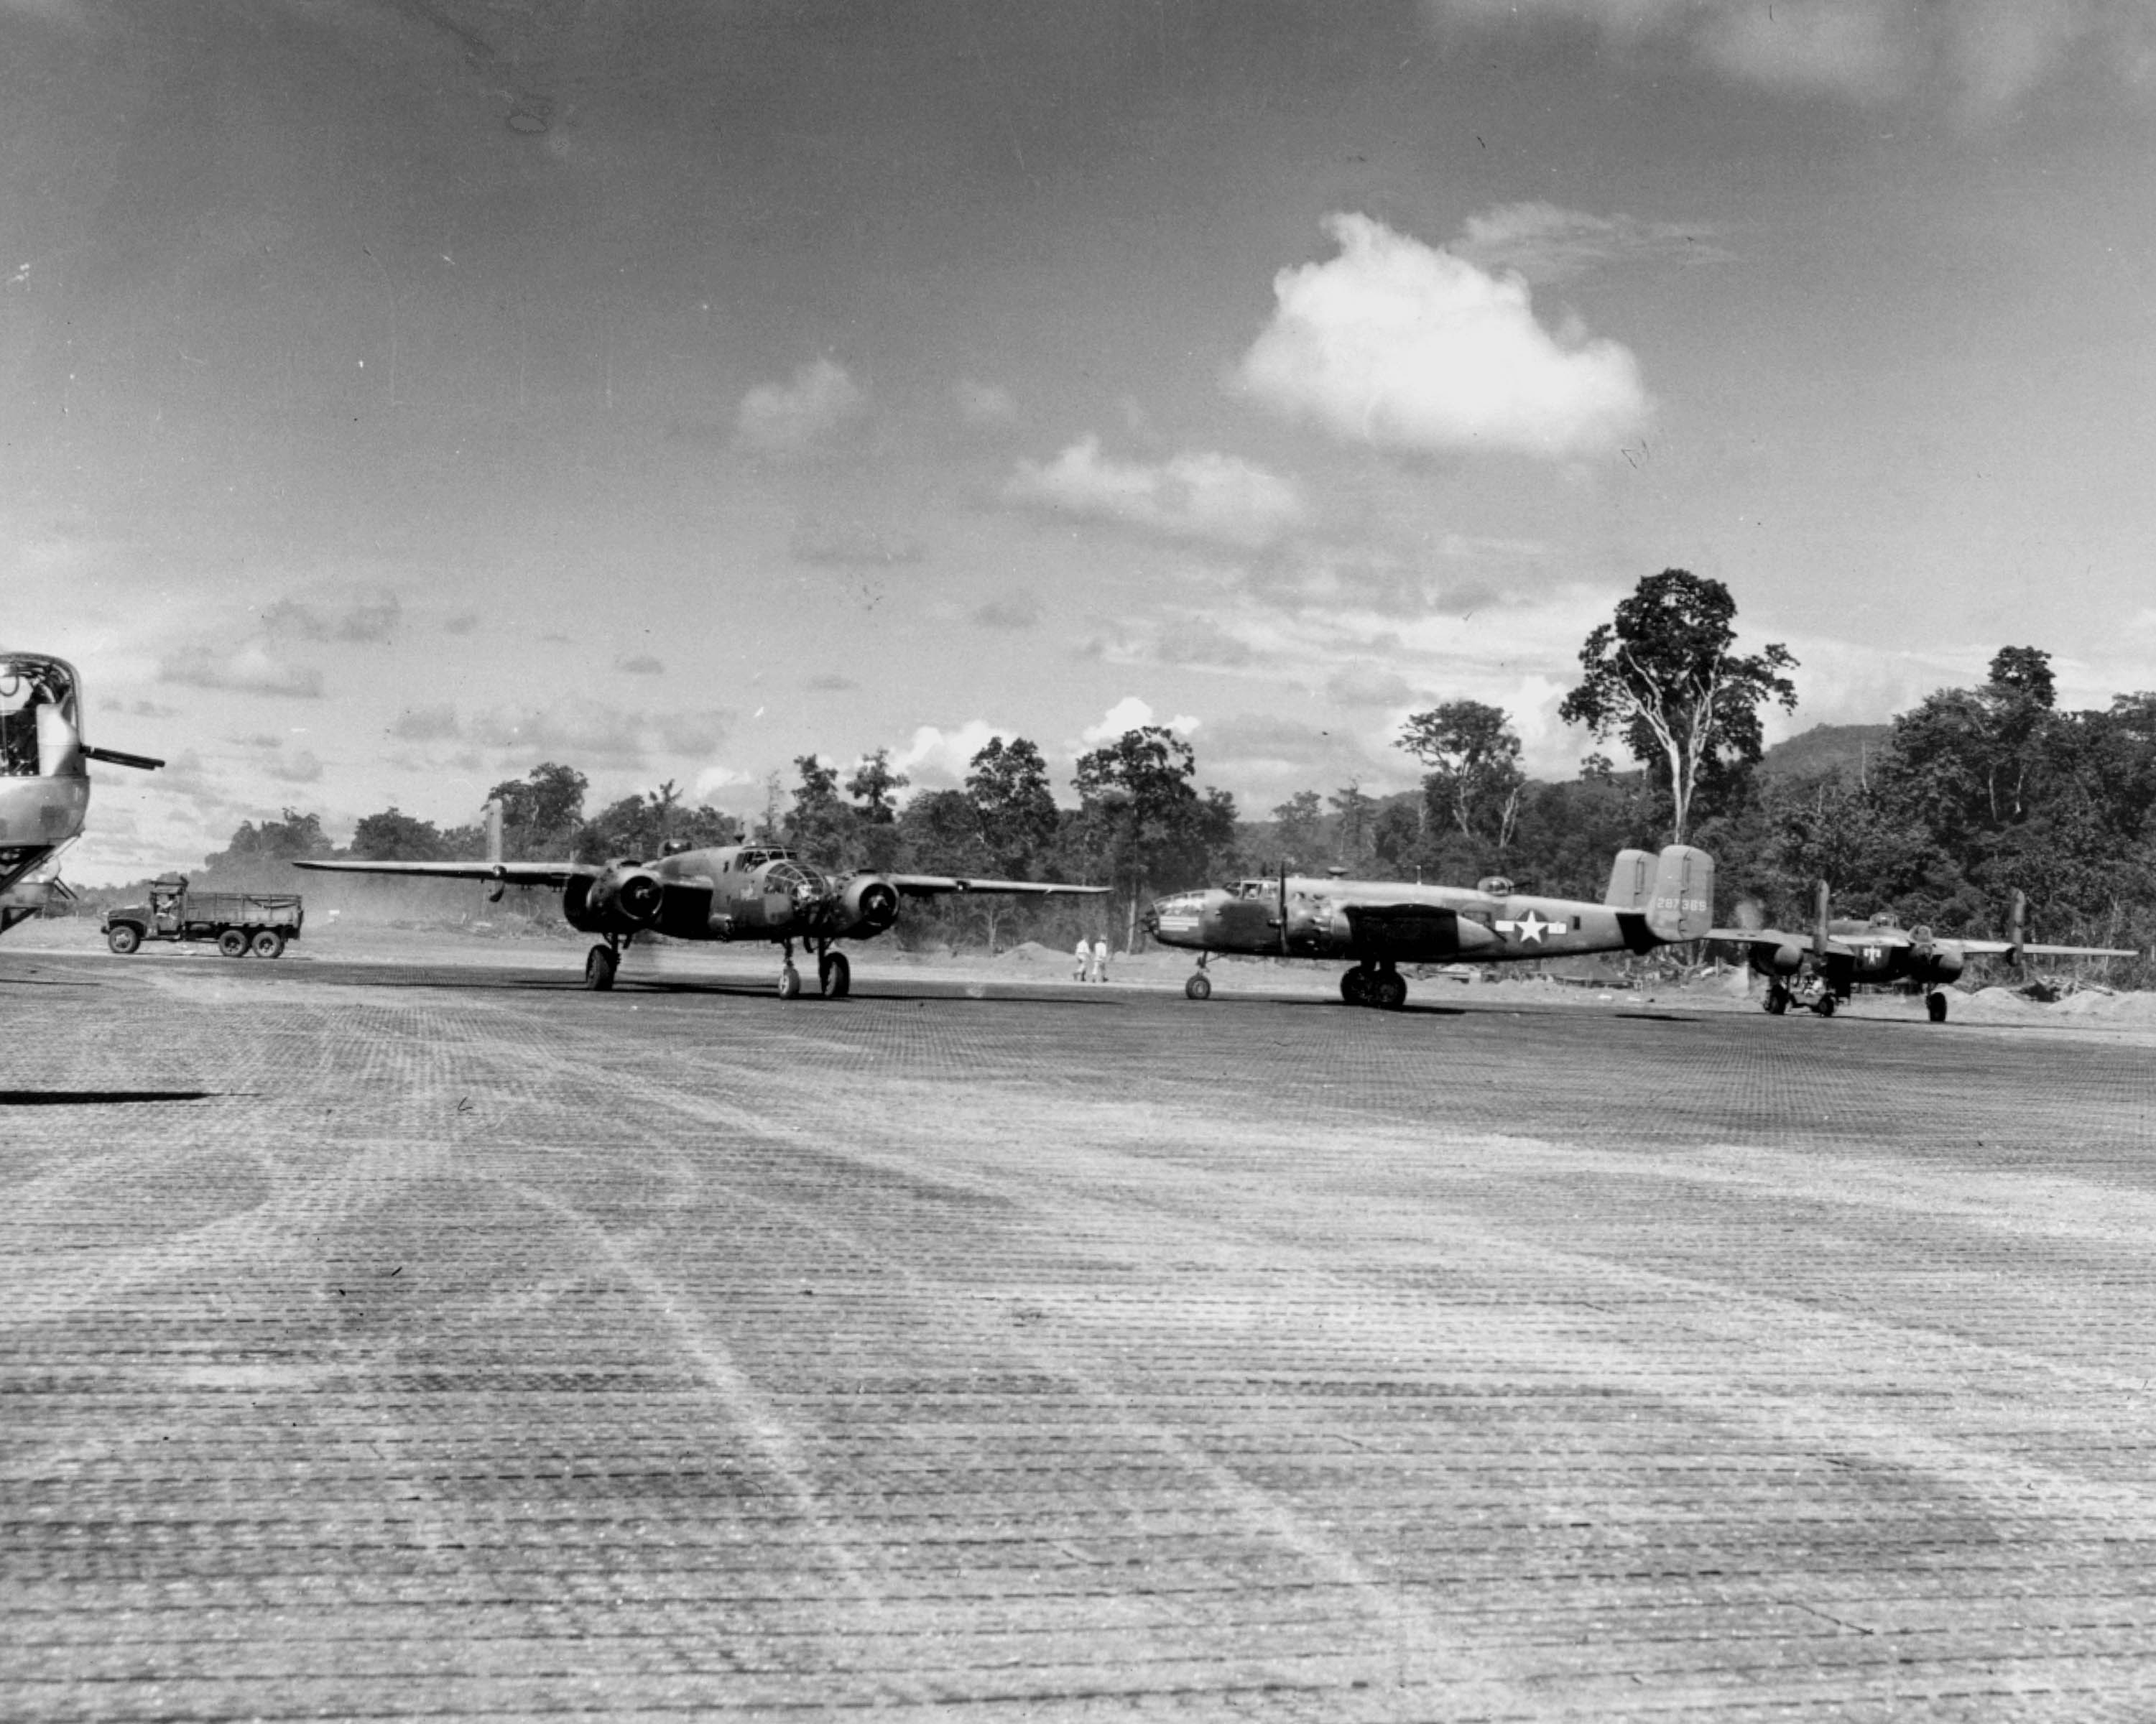 B-25 Mitchell bombers of the 42nd Bomb Group on the ramp at Munda, New Georgia, Solomons, 1943. Note B-24 Liberator nose turrets at left.